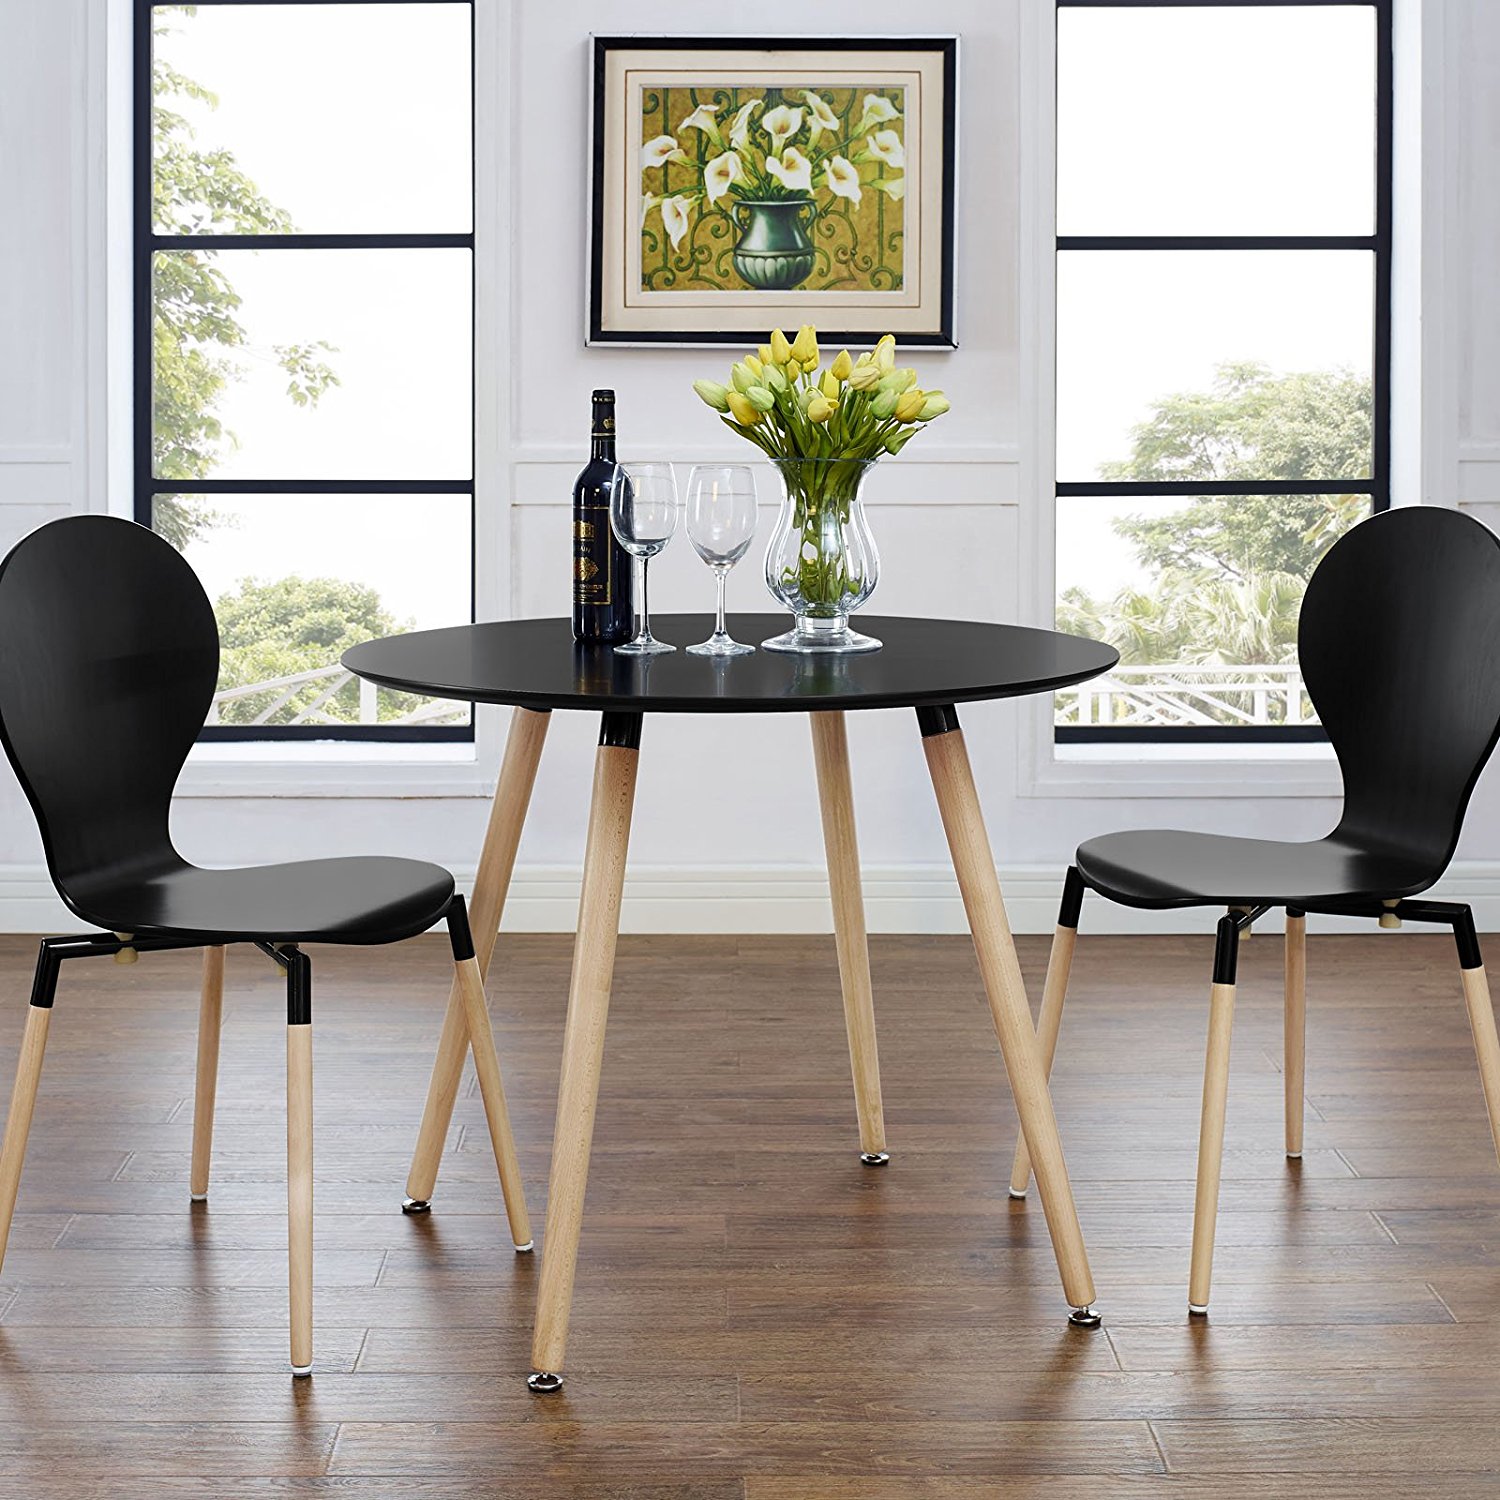 Twenty dining tables that work great in small spaces - Living in a shoebox